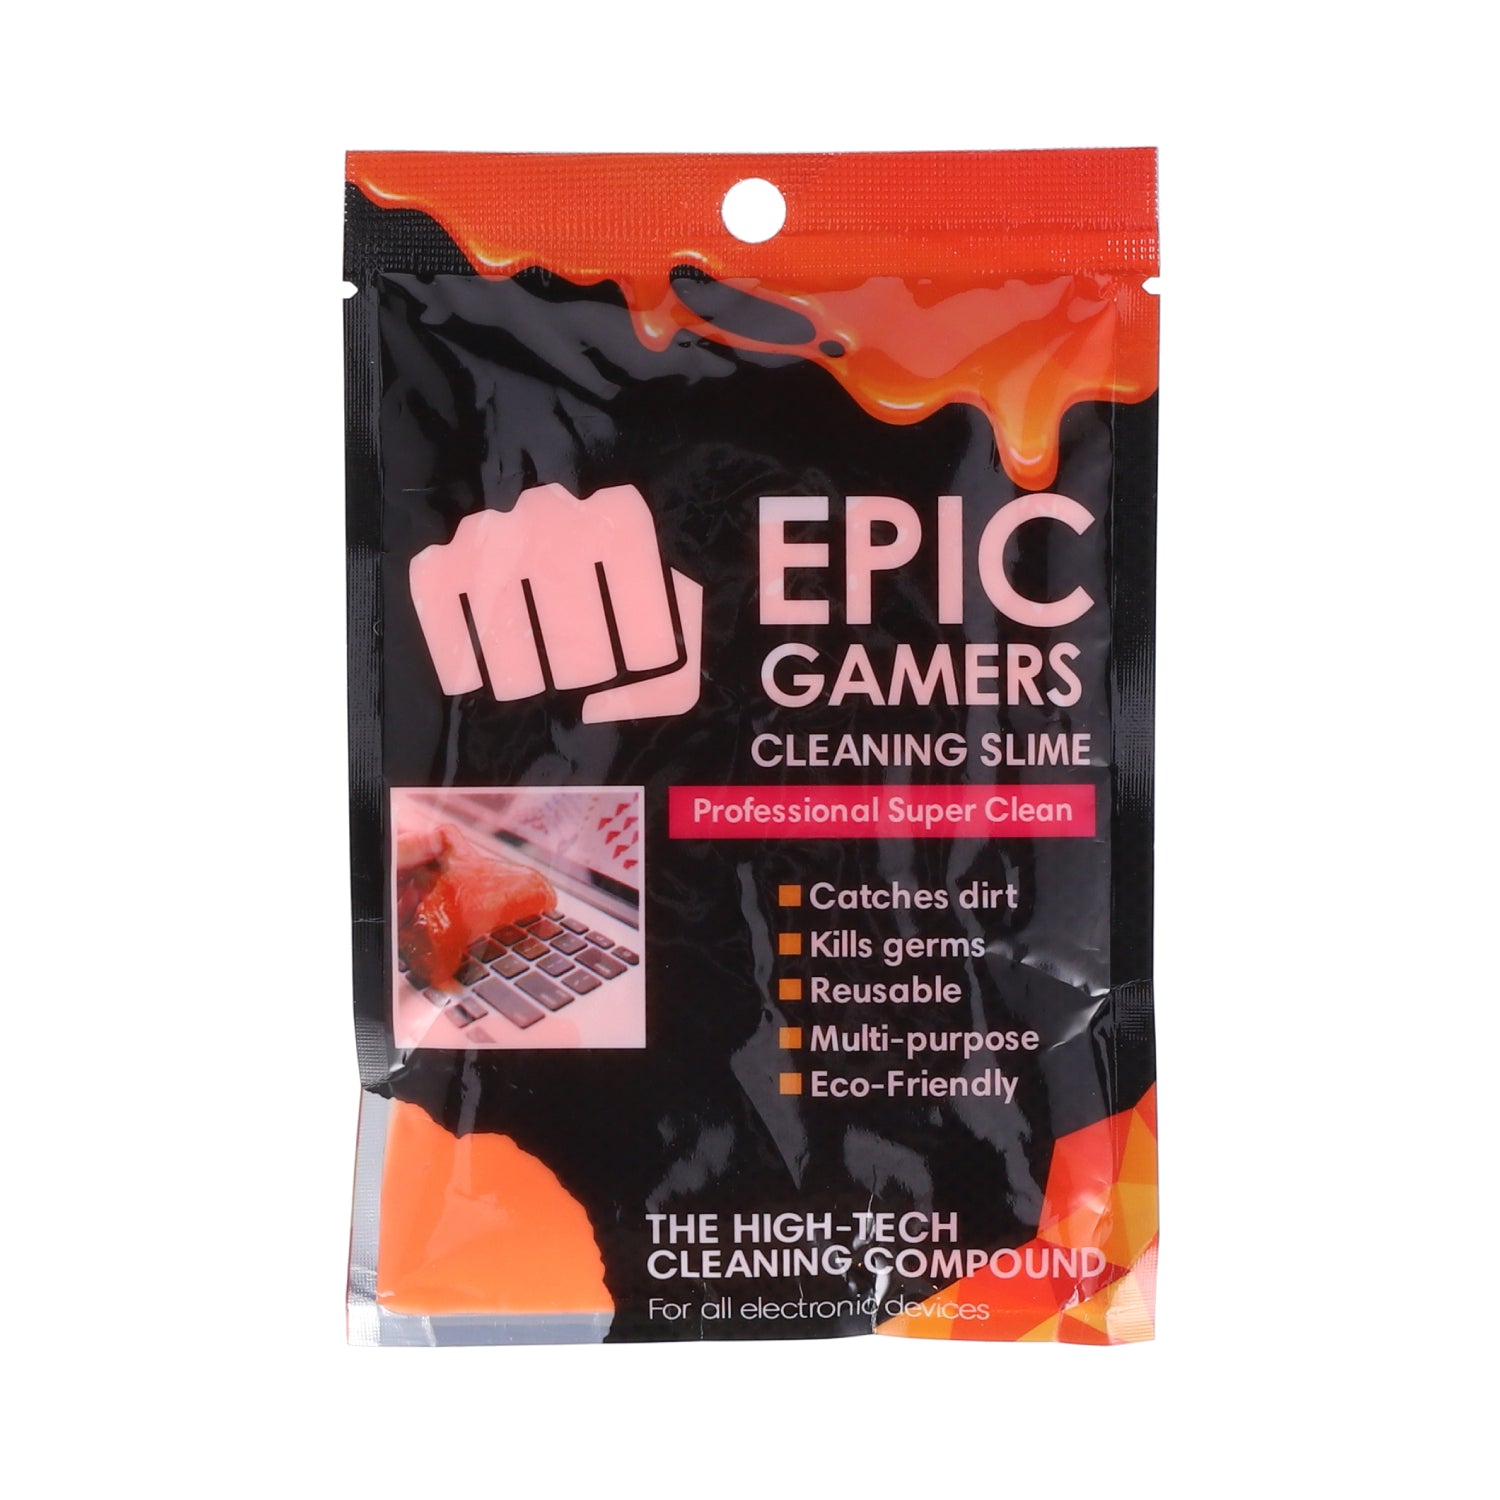 Epic Gamers Cleaning Slime - Orange - Store 974 | ستور ٩٧٤